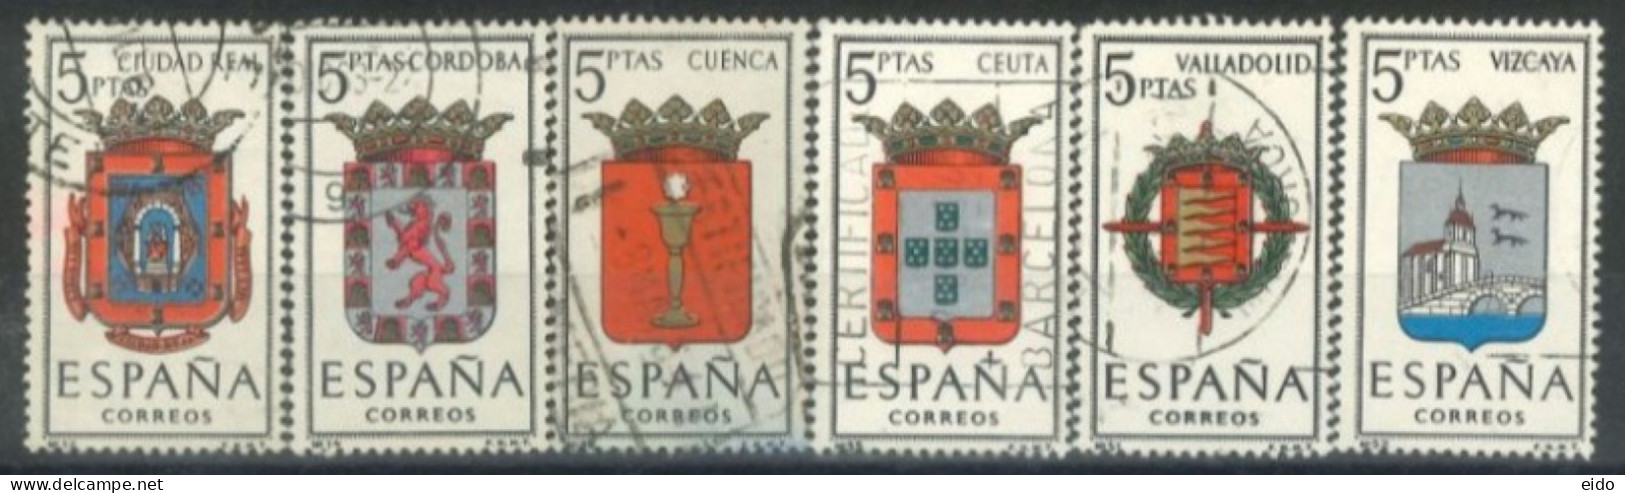 SPAIN,  1963/66, PROVINCIAL ARMS STAMPS SET OF 6, USED. - Usados